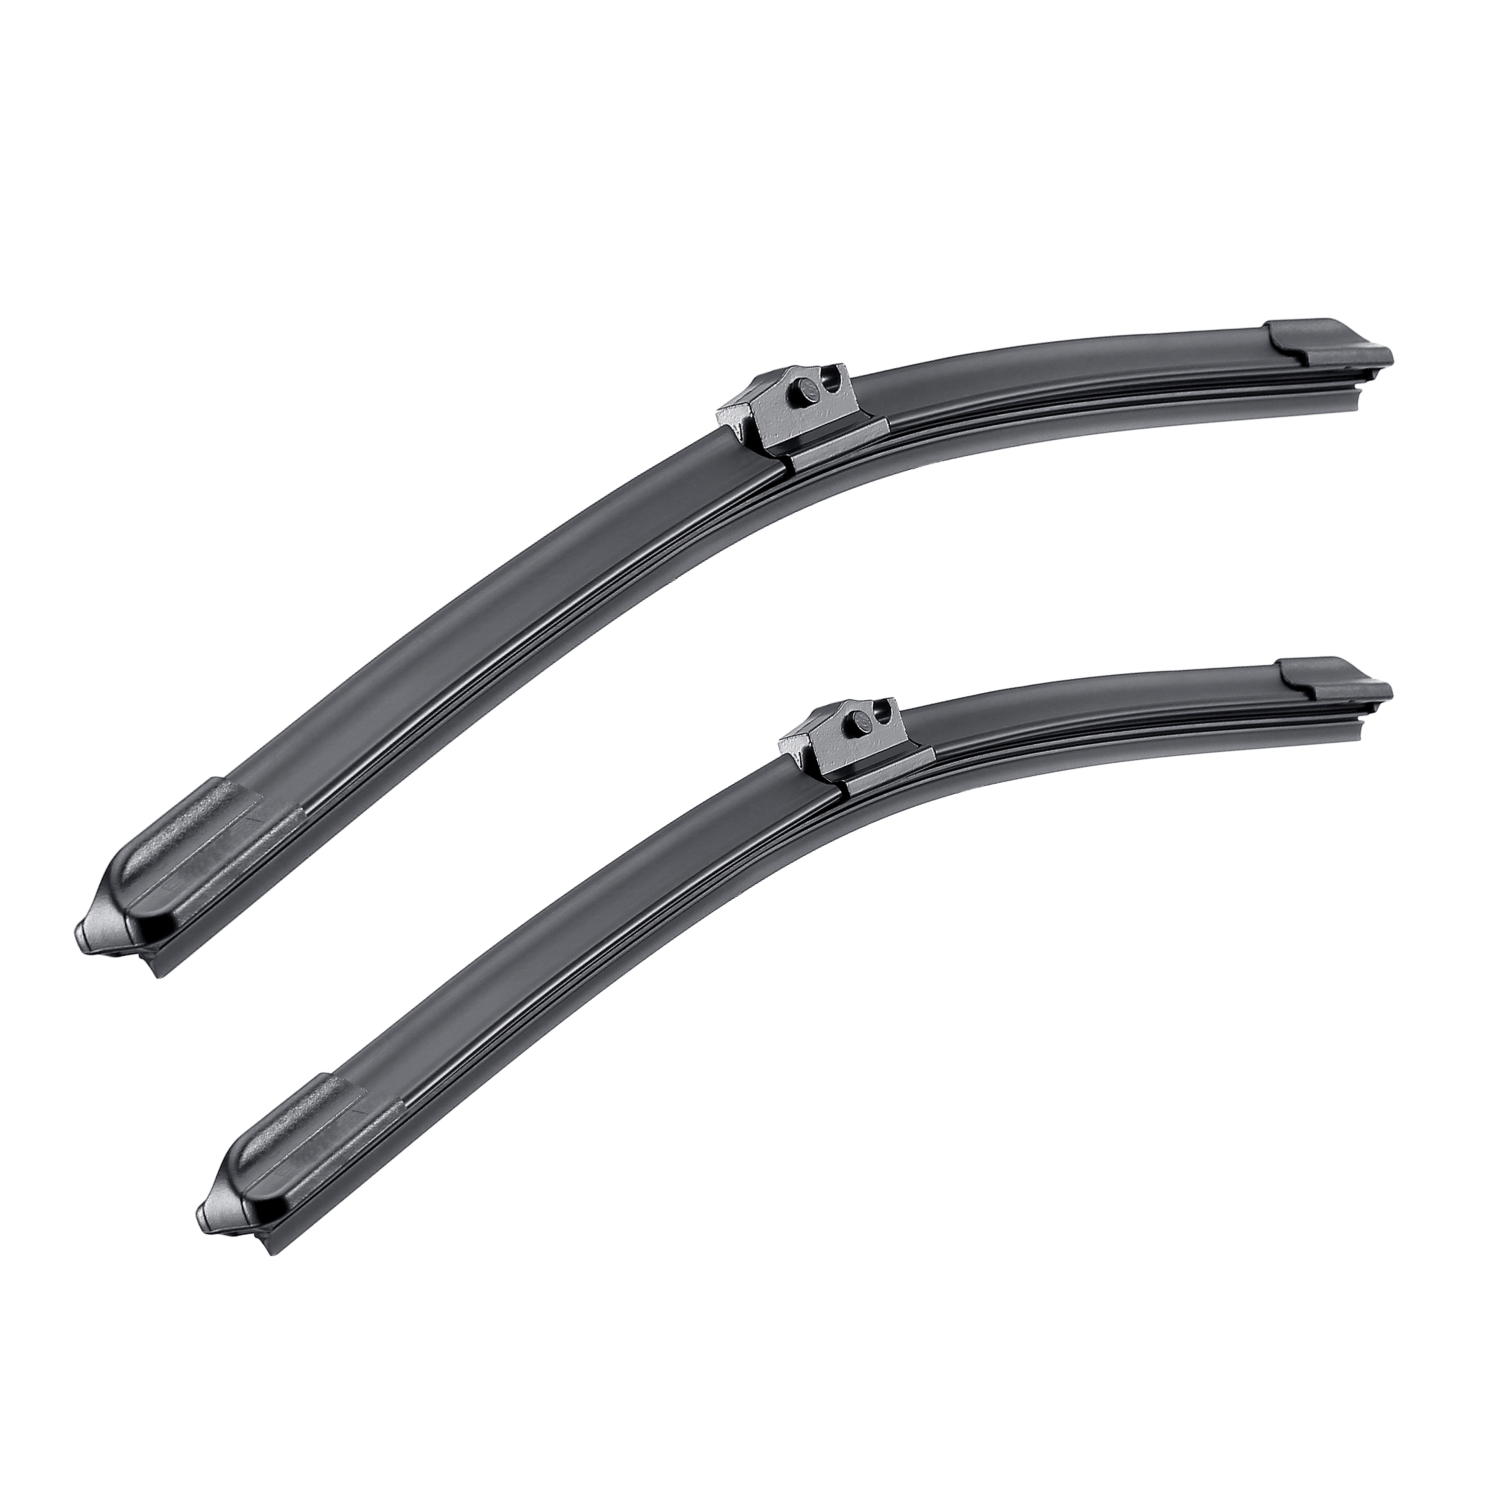 Wiper Blades for Subaru Forester 2012 2013 2014 2015 2016 - 2018 Front 26" + 17" | eBay What Size Wiper Blades For 2015 Subaru Forester